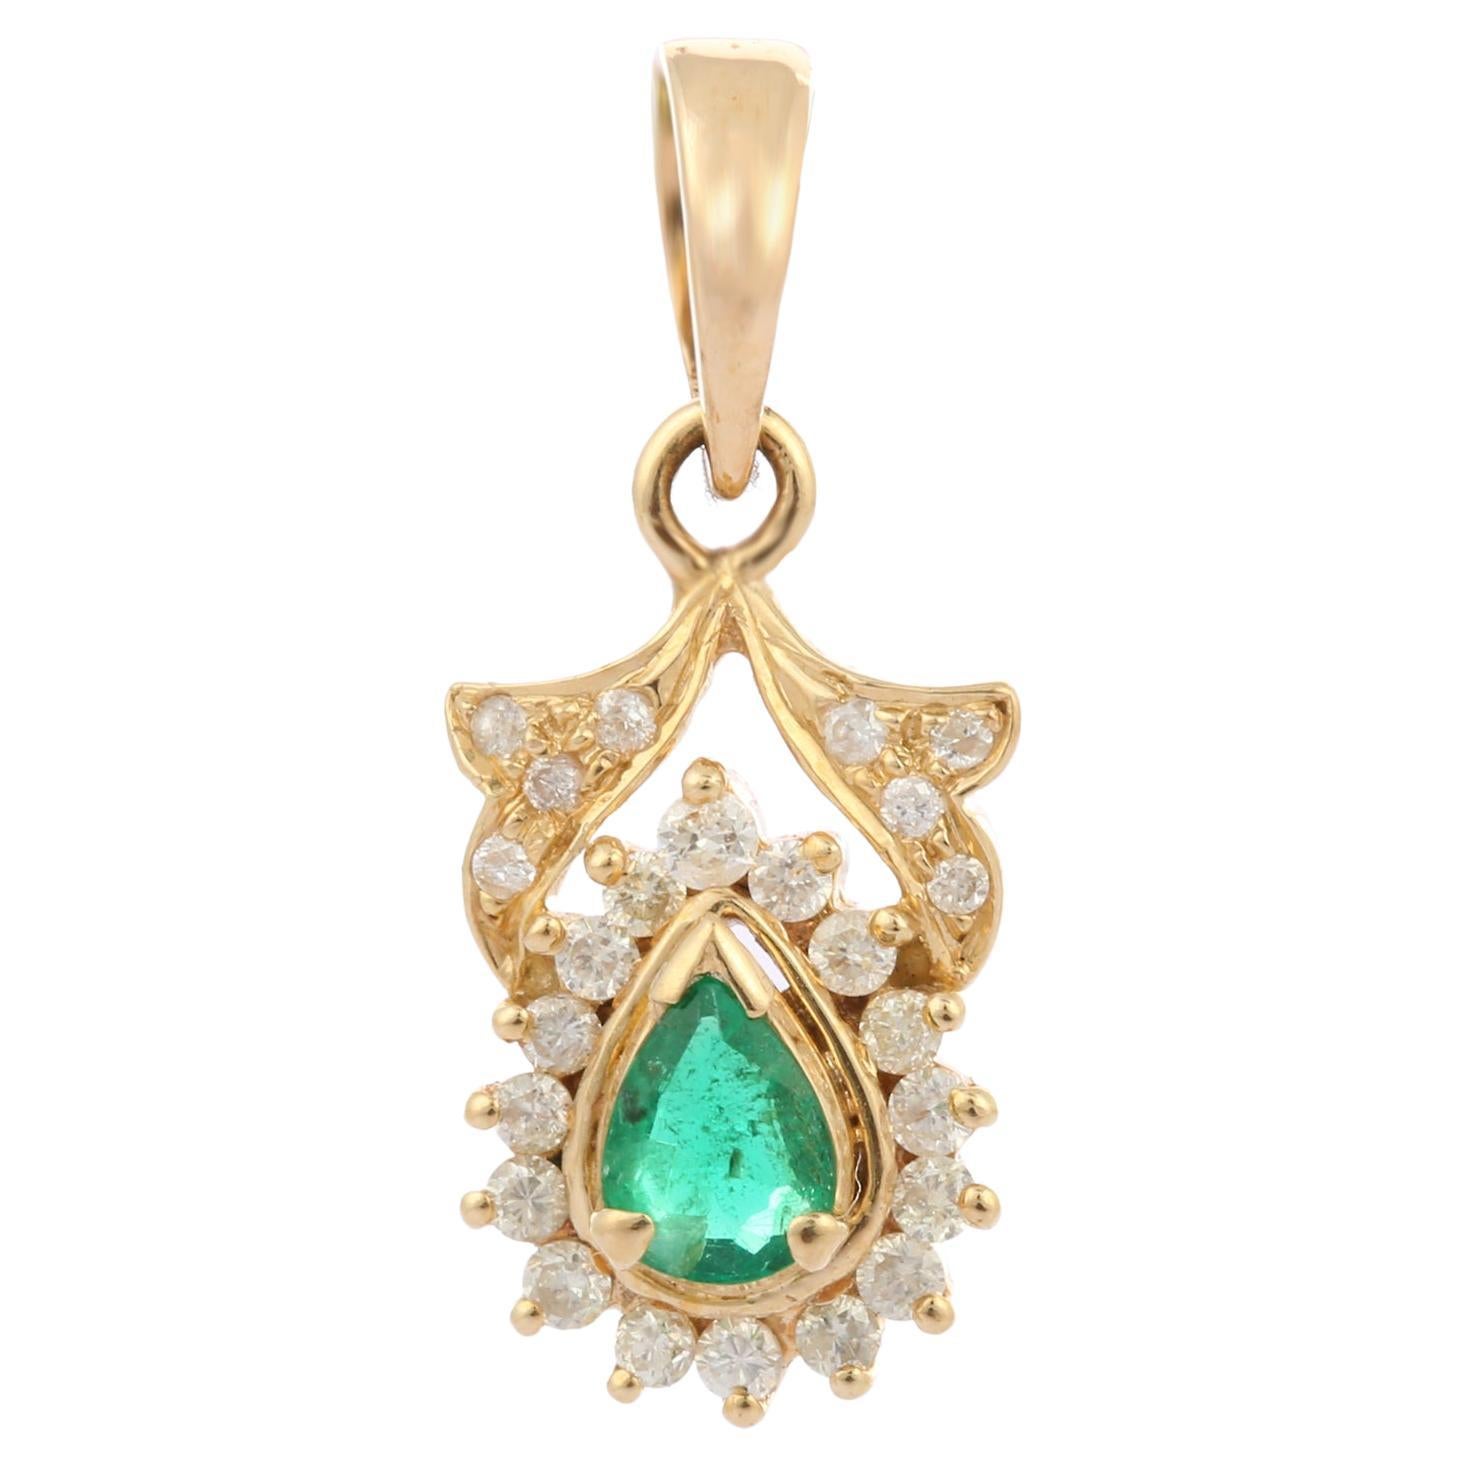 Pear Cut Emerald Diamond Pendant 14k Yellow Gold, Bride To Be Gift For Women For Sale